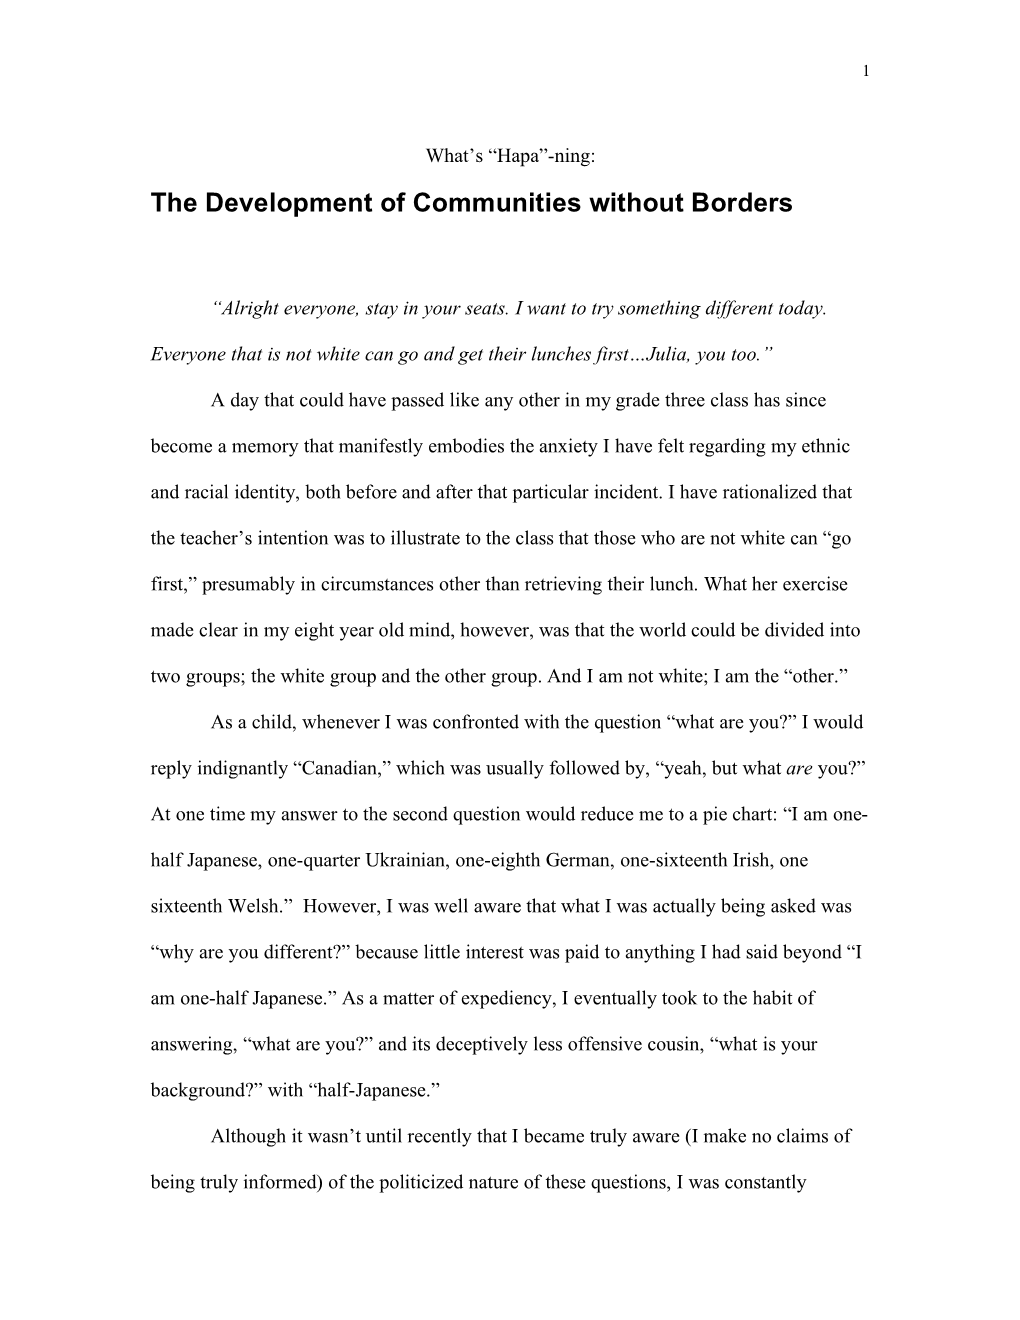 The Development of Communities Without Borders